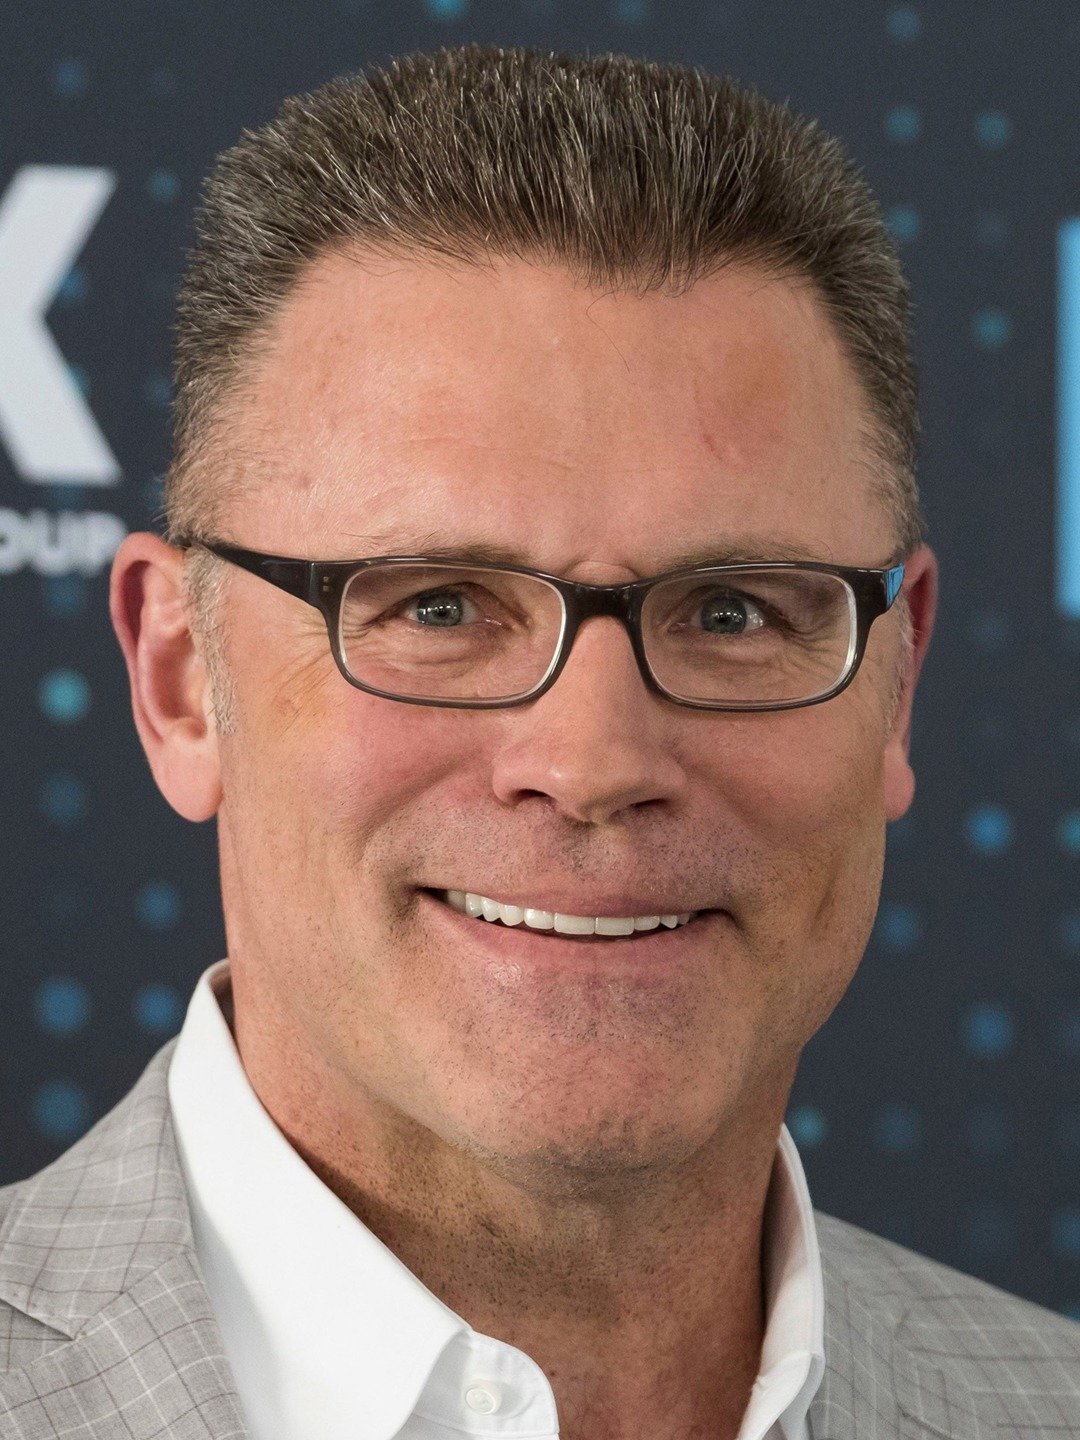 How tall is Howie Long?